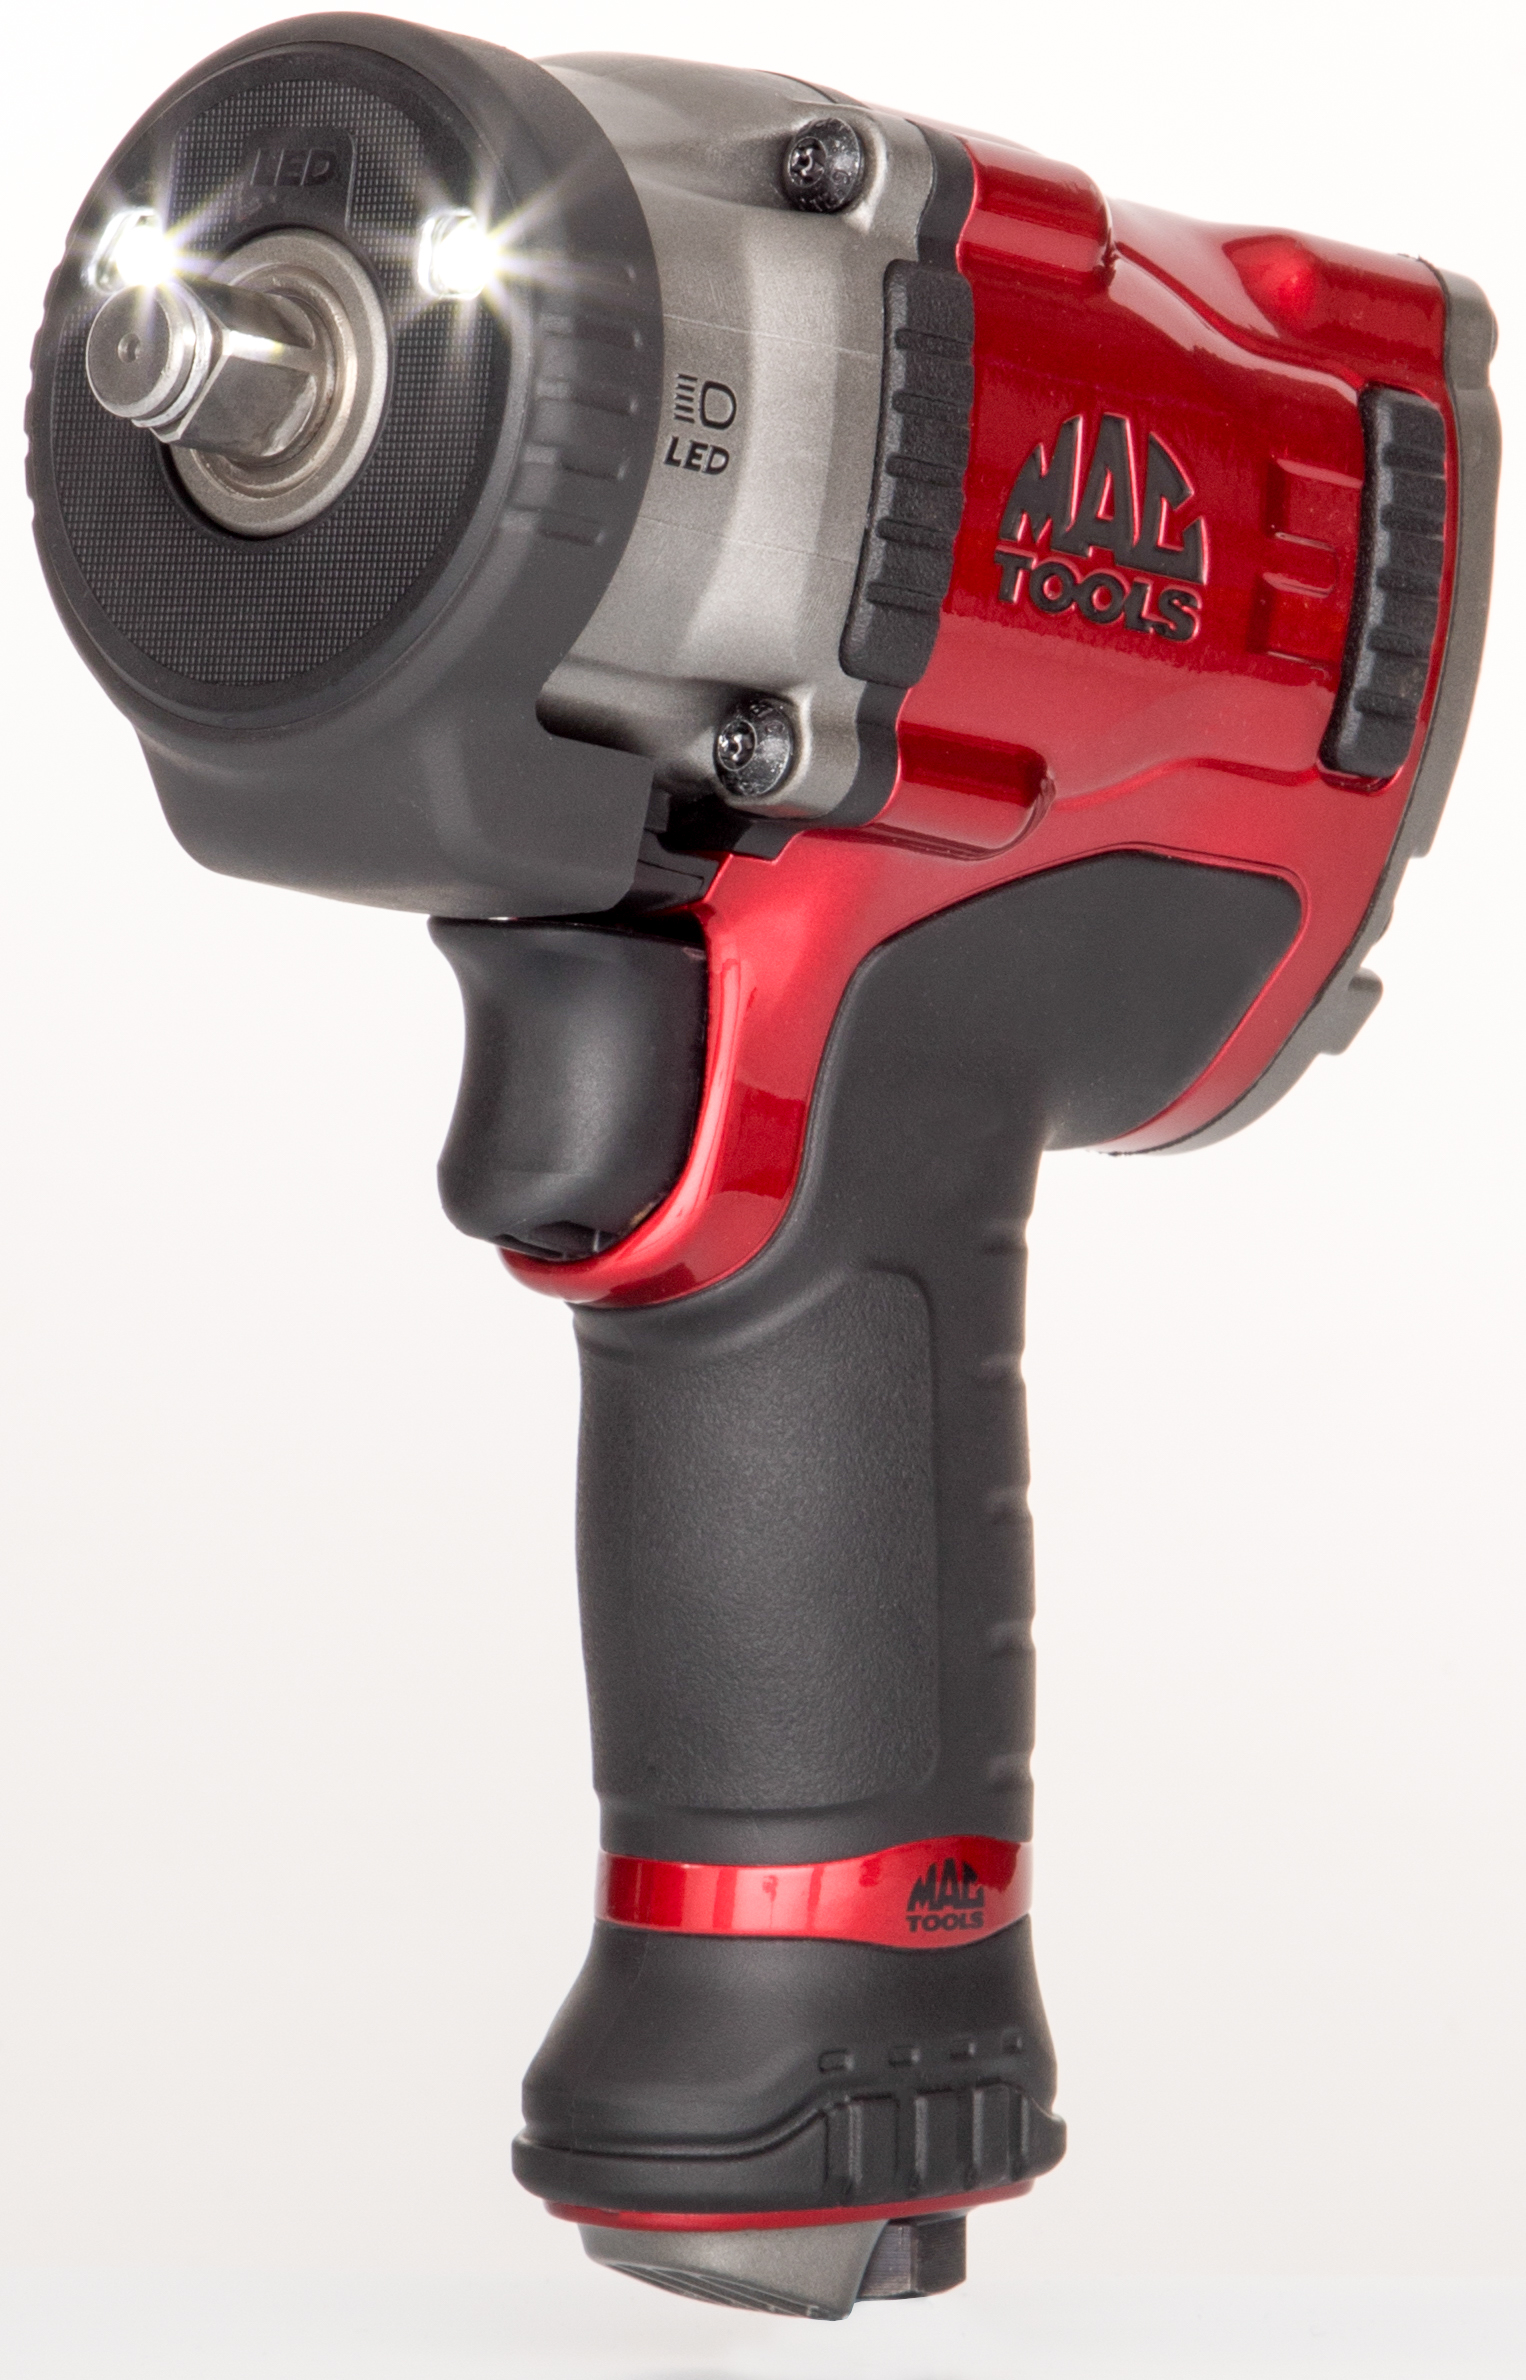 Air Impact Wrench Chicago Pneumatic 1/2" High Impact Magnesium Drive Compact 